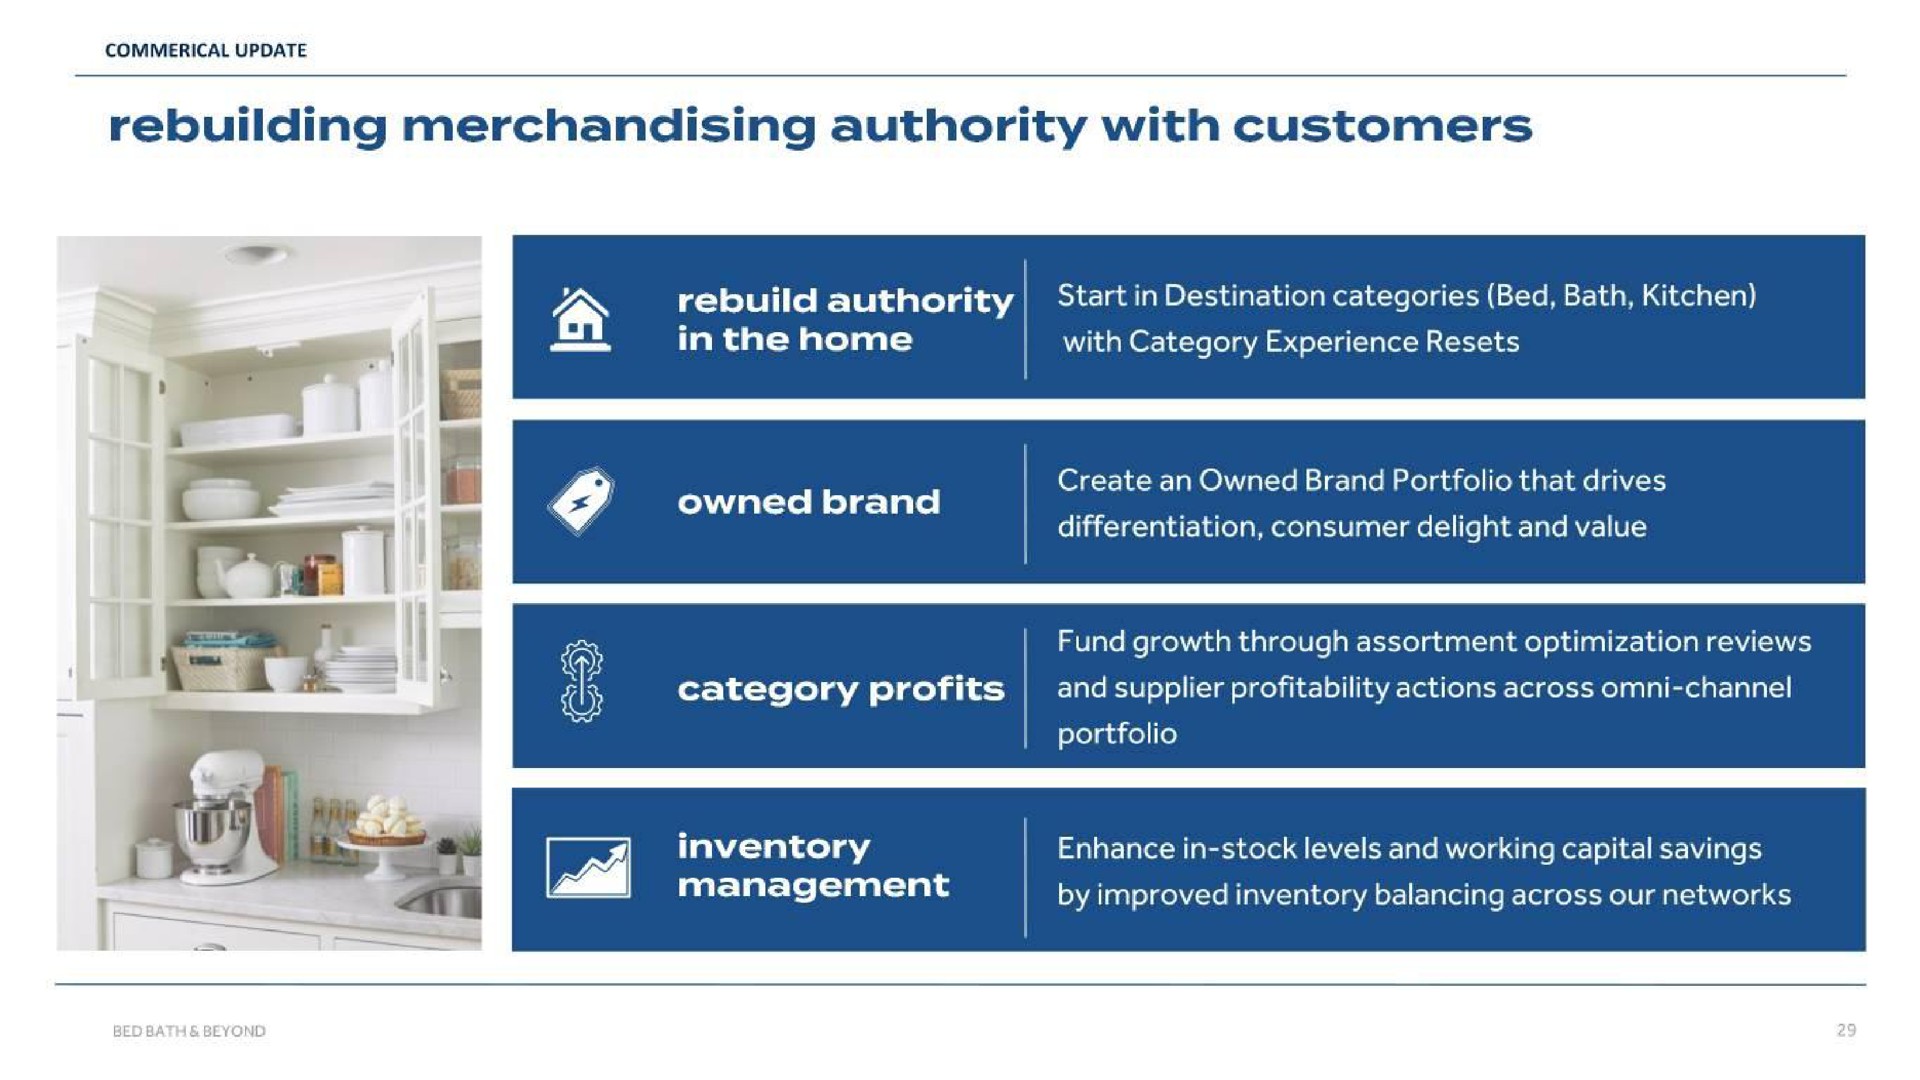 rebuilding merchandising authority with customers | Bed Bath & Beyond